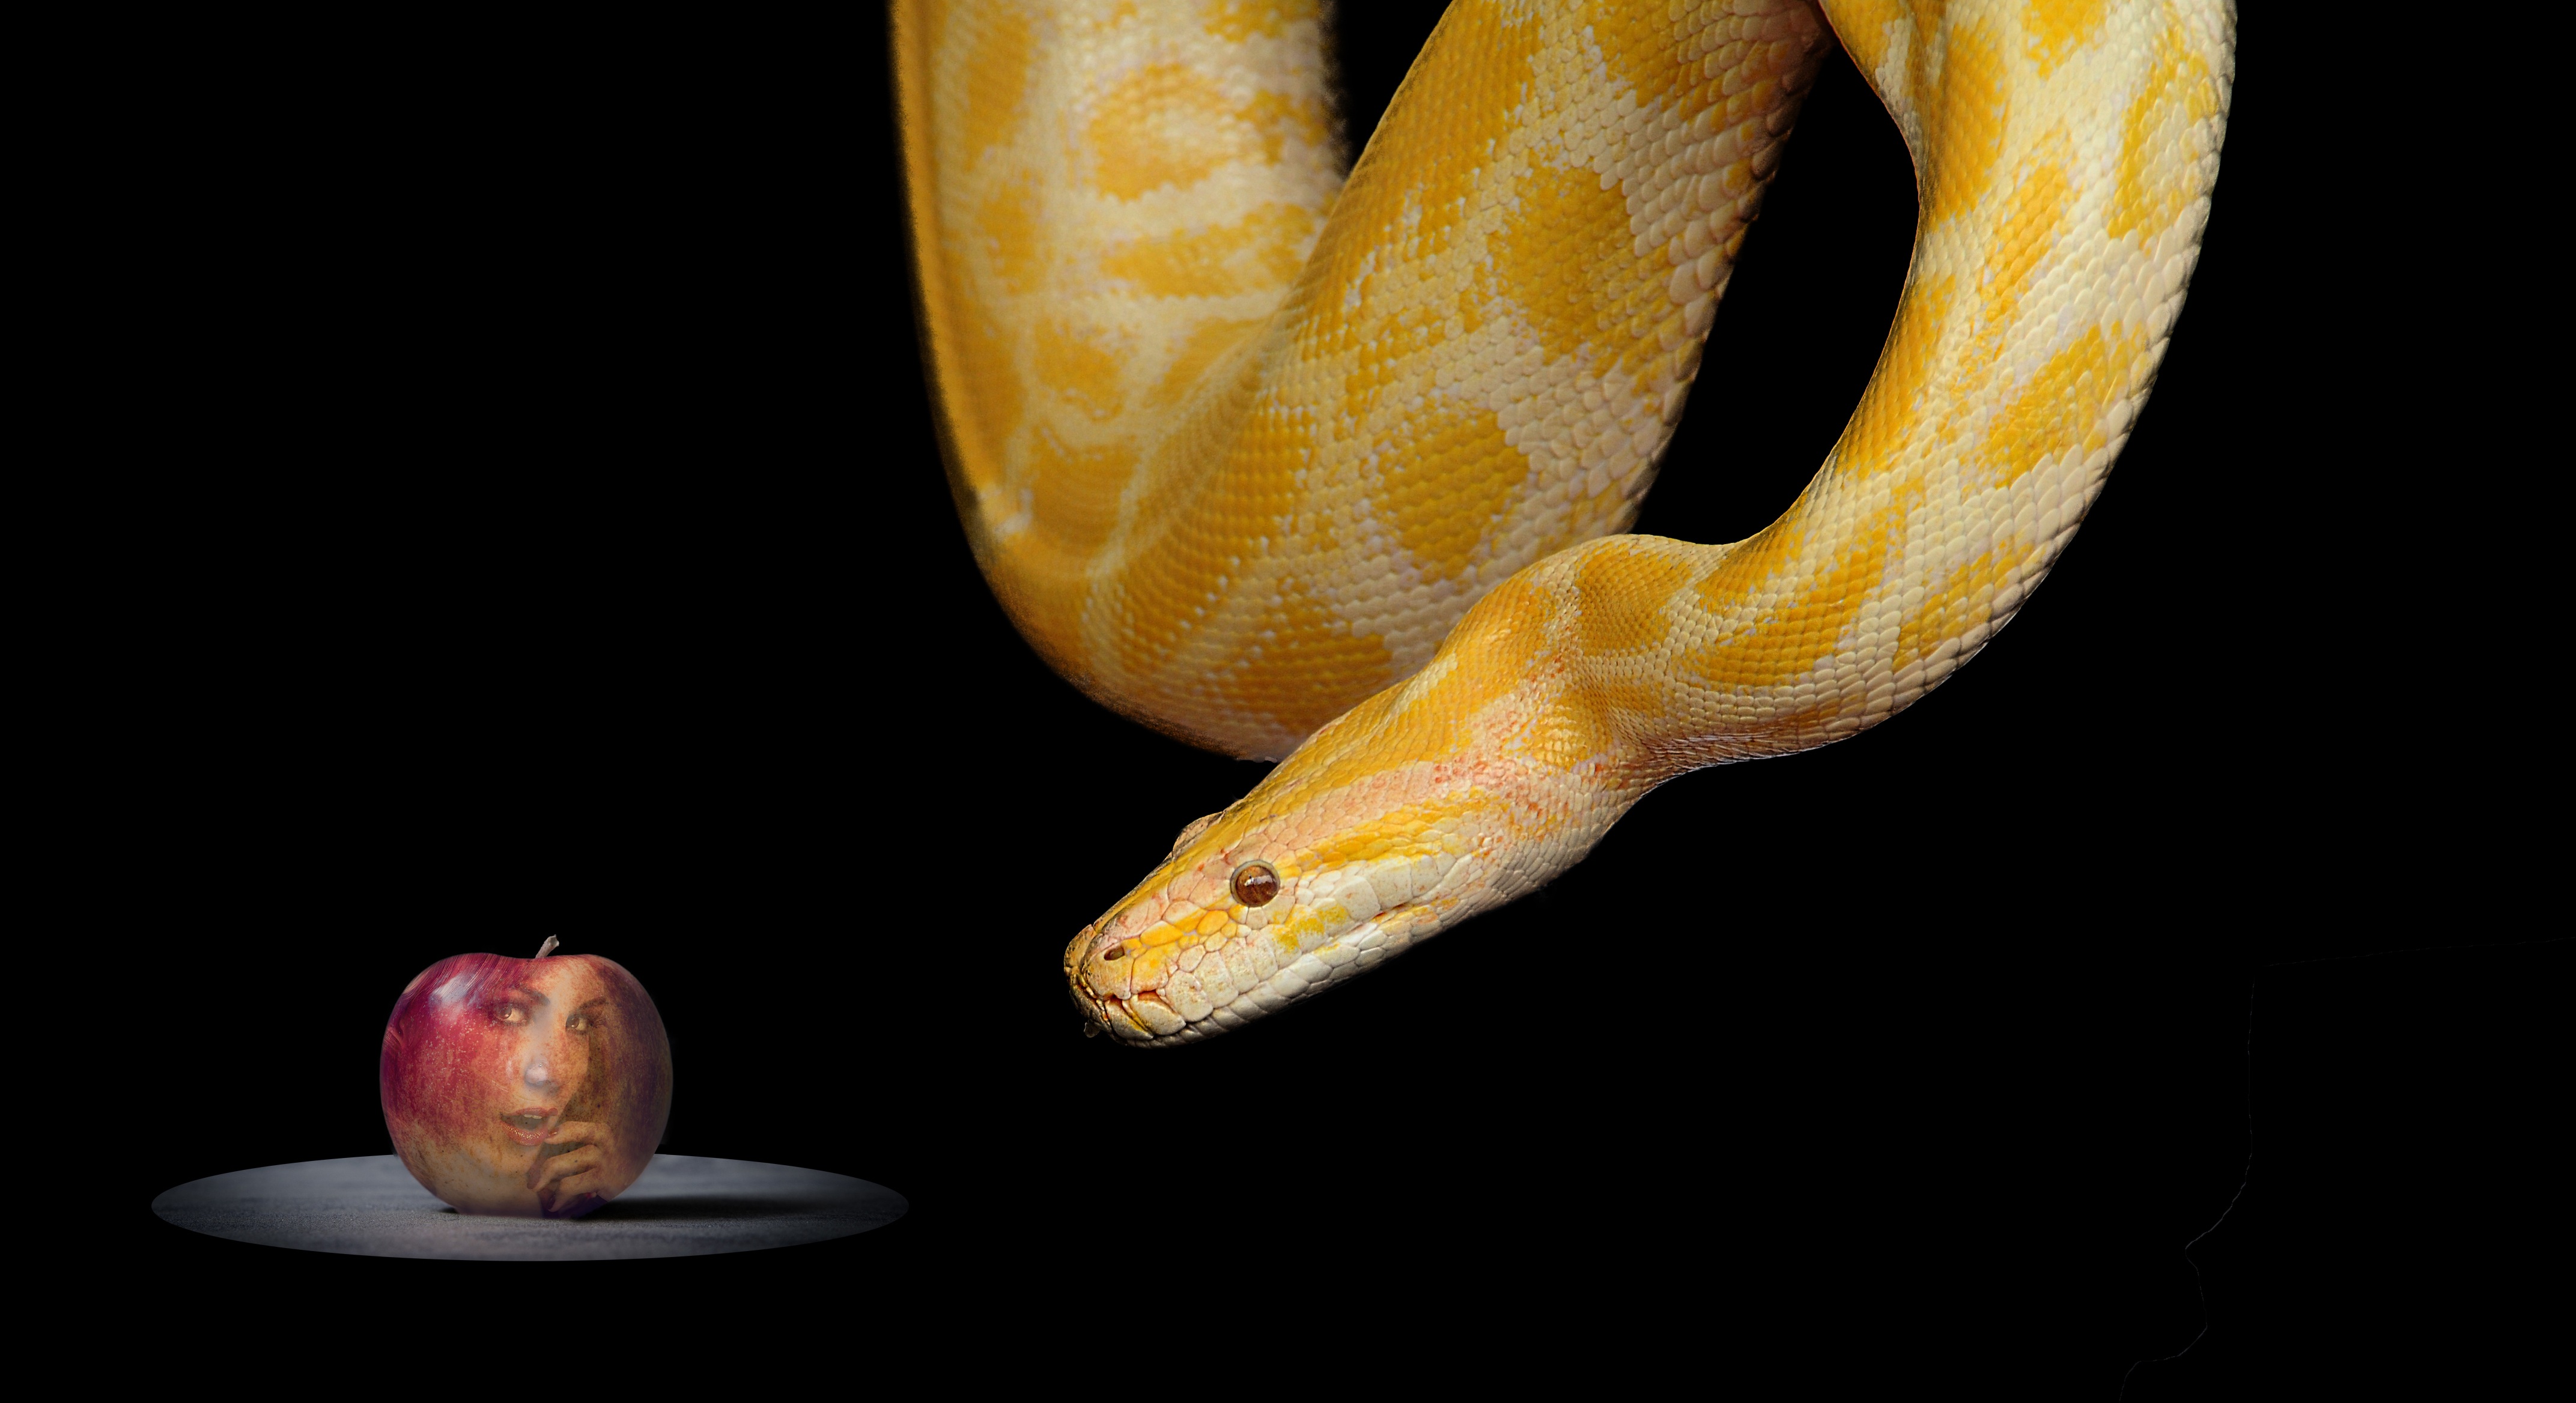 Snake and Apple free image